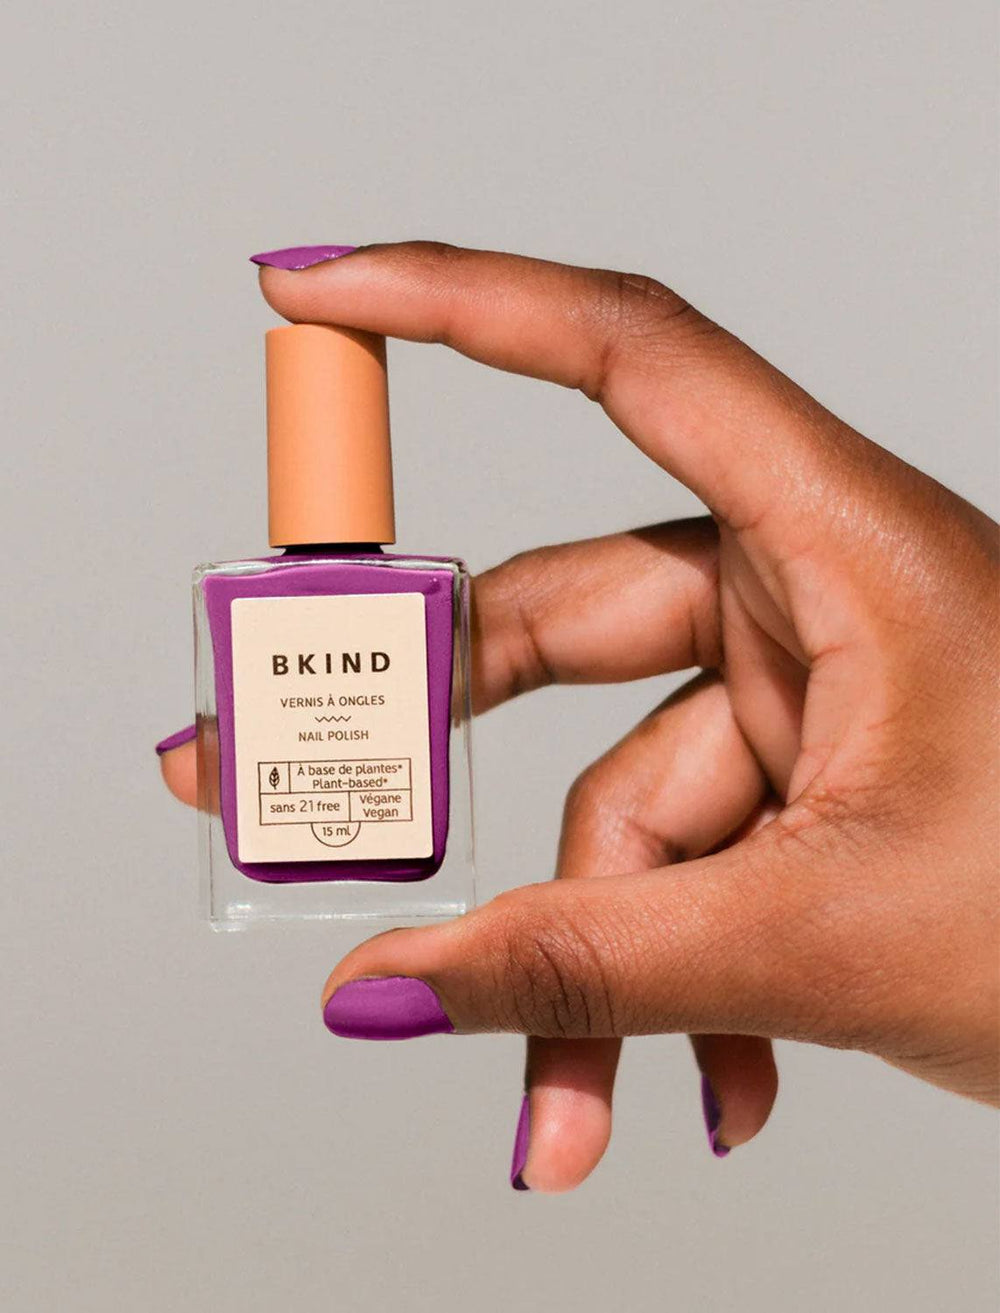 BKIND's nail polish in the color aries.